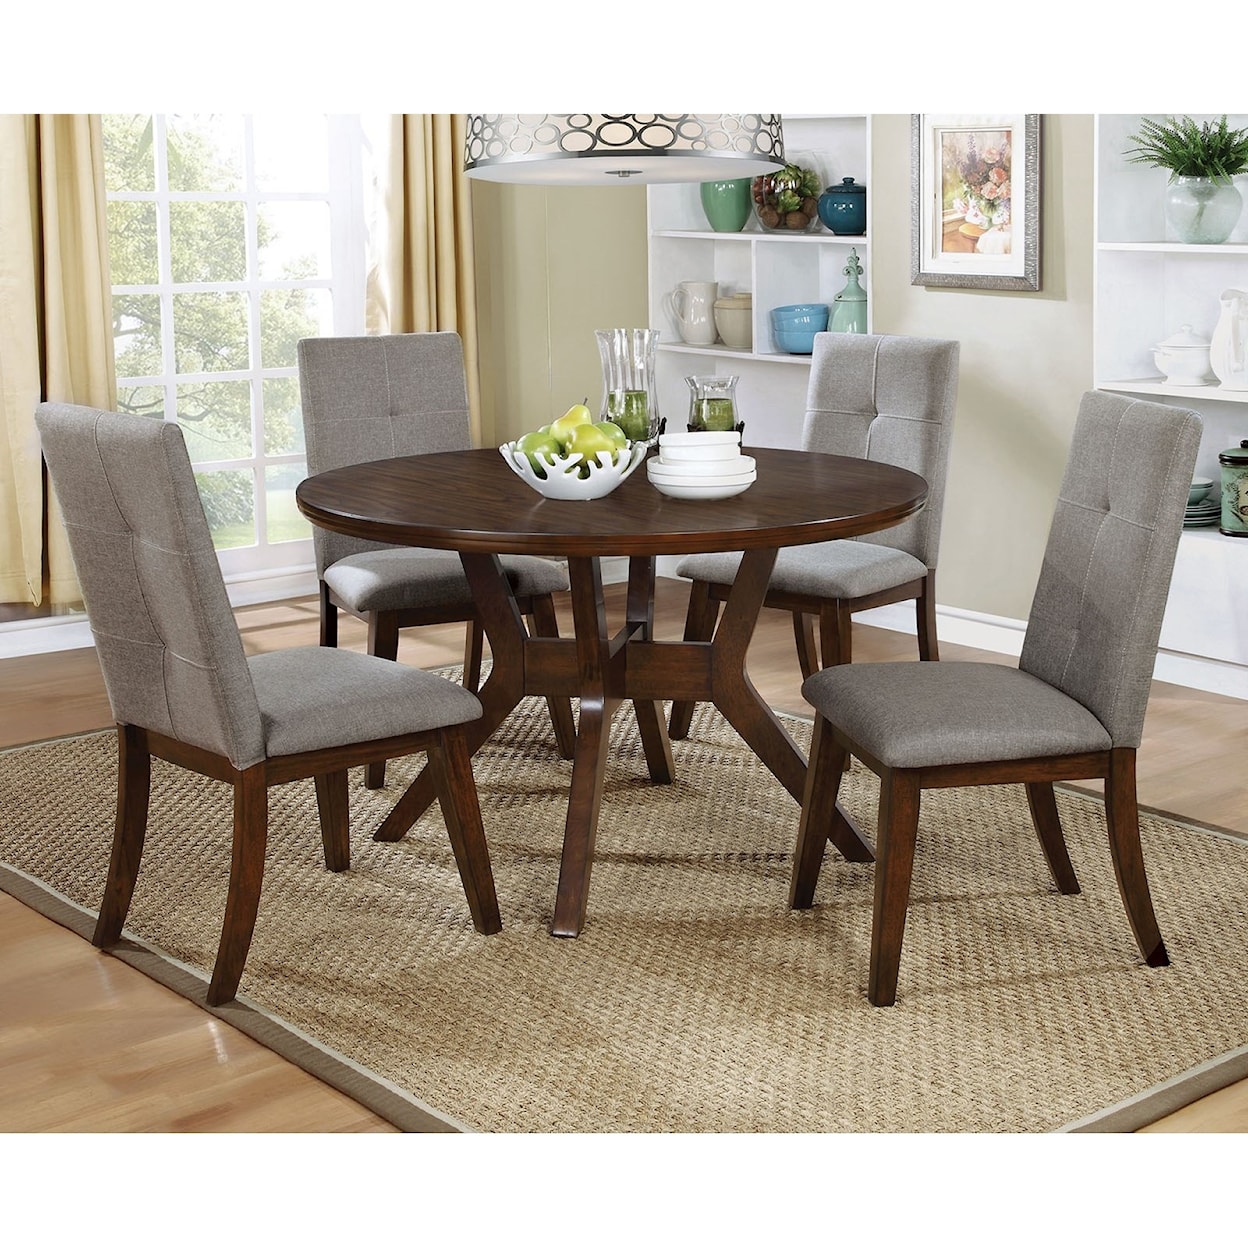 Furniture of America Abelone Round Table